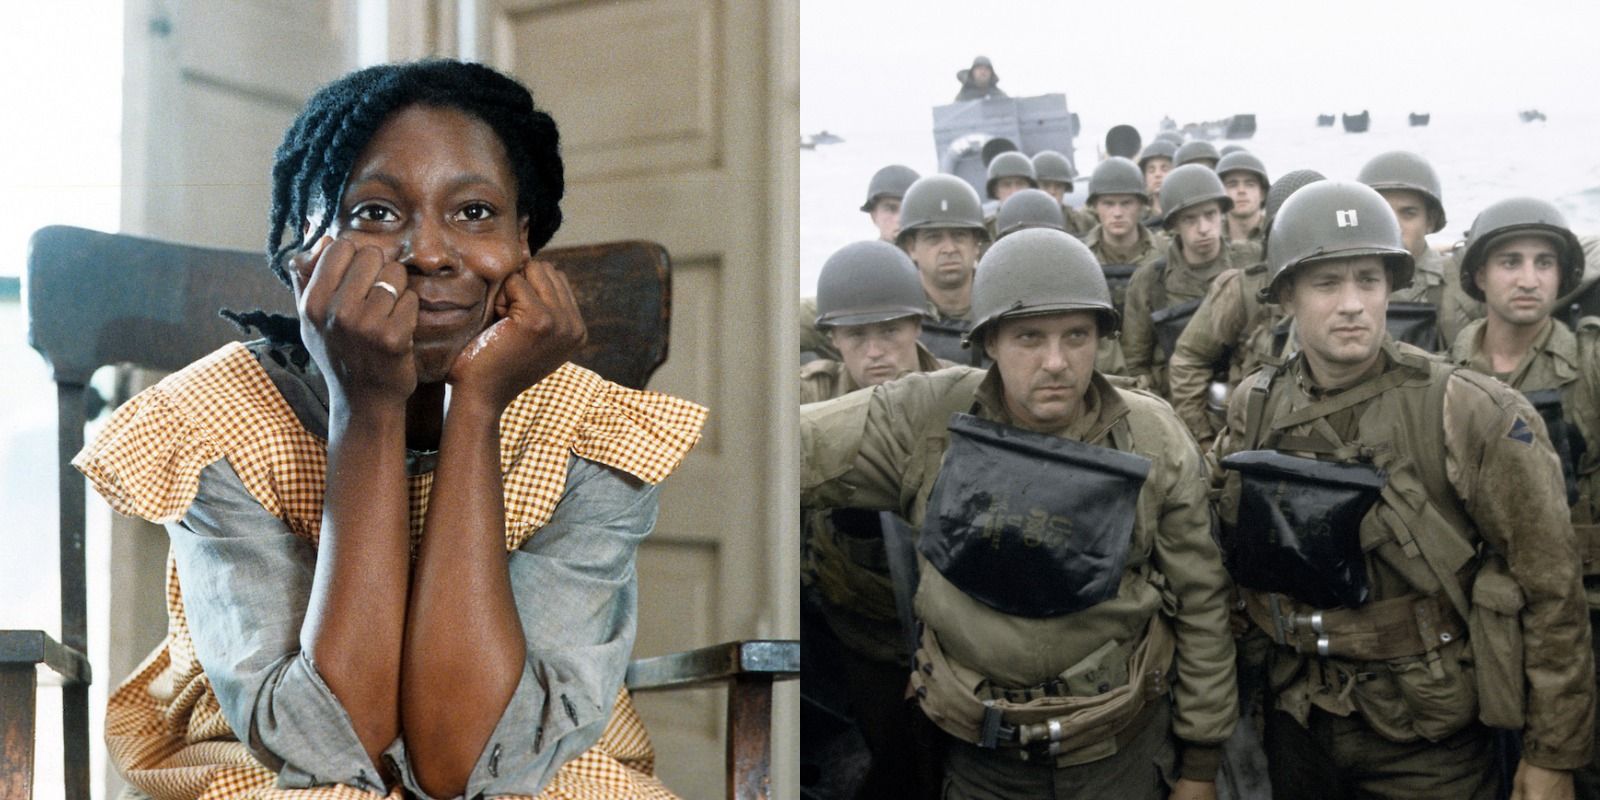 Split image of The Color Purple and Saving Private Ryan scenes